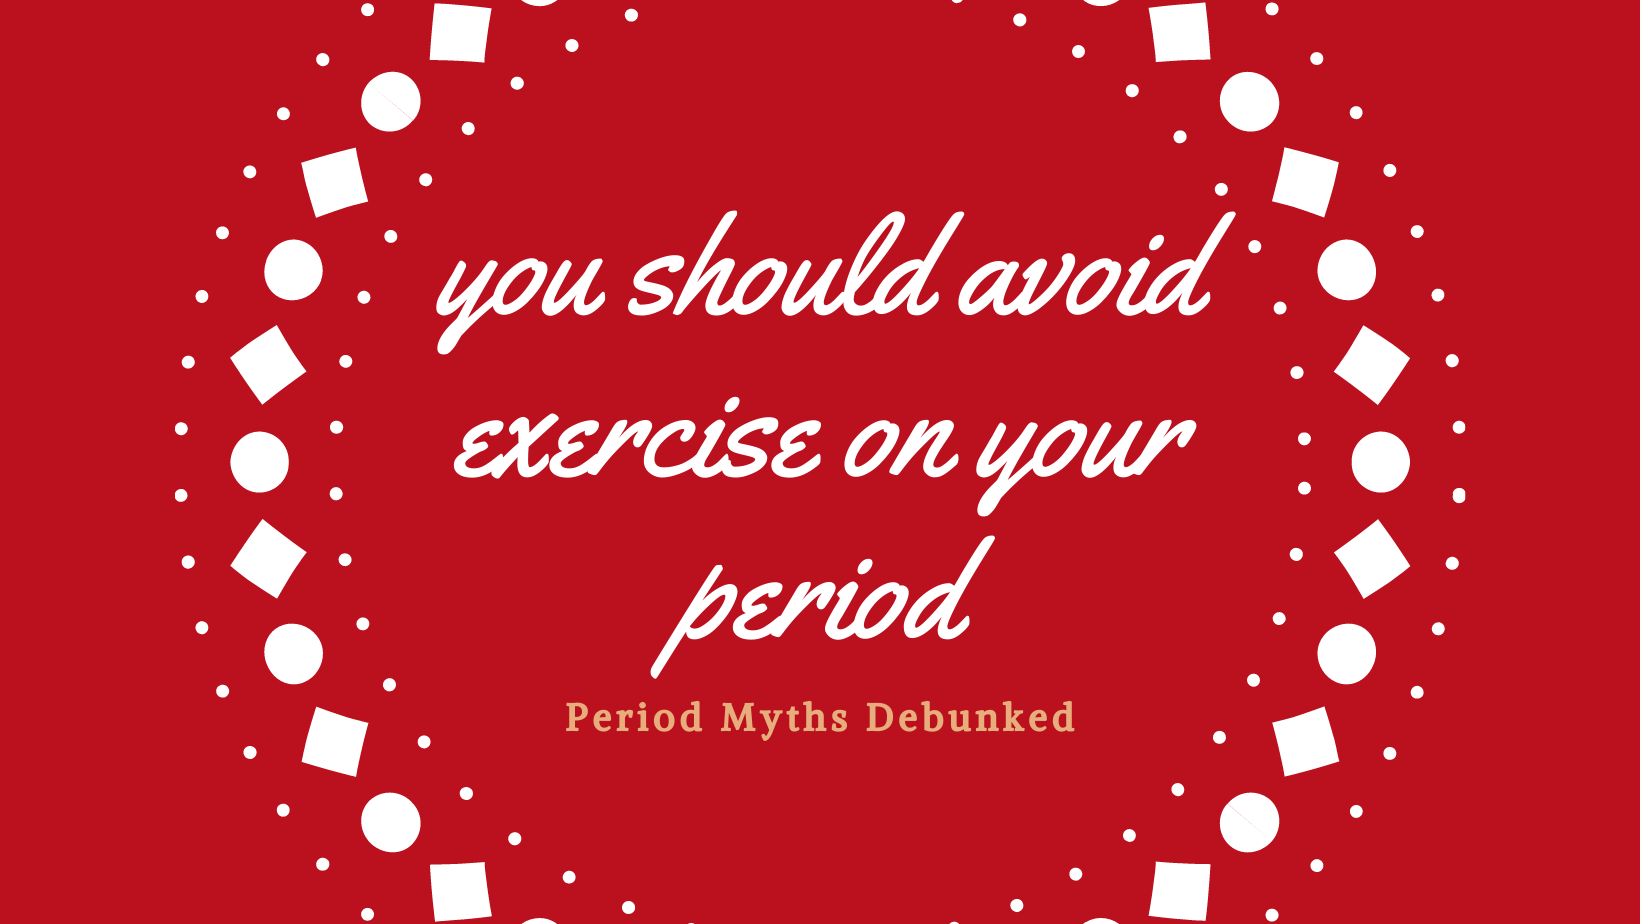 Graphic about debunking period myths that you should avoid exercise on your period.